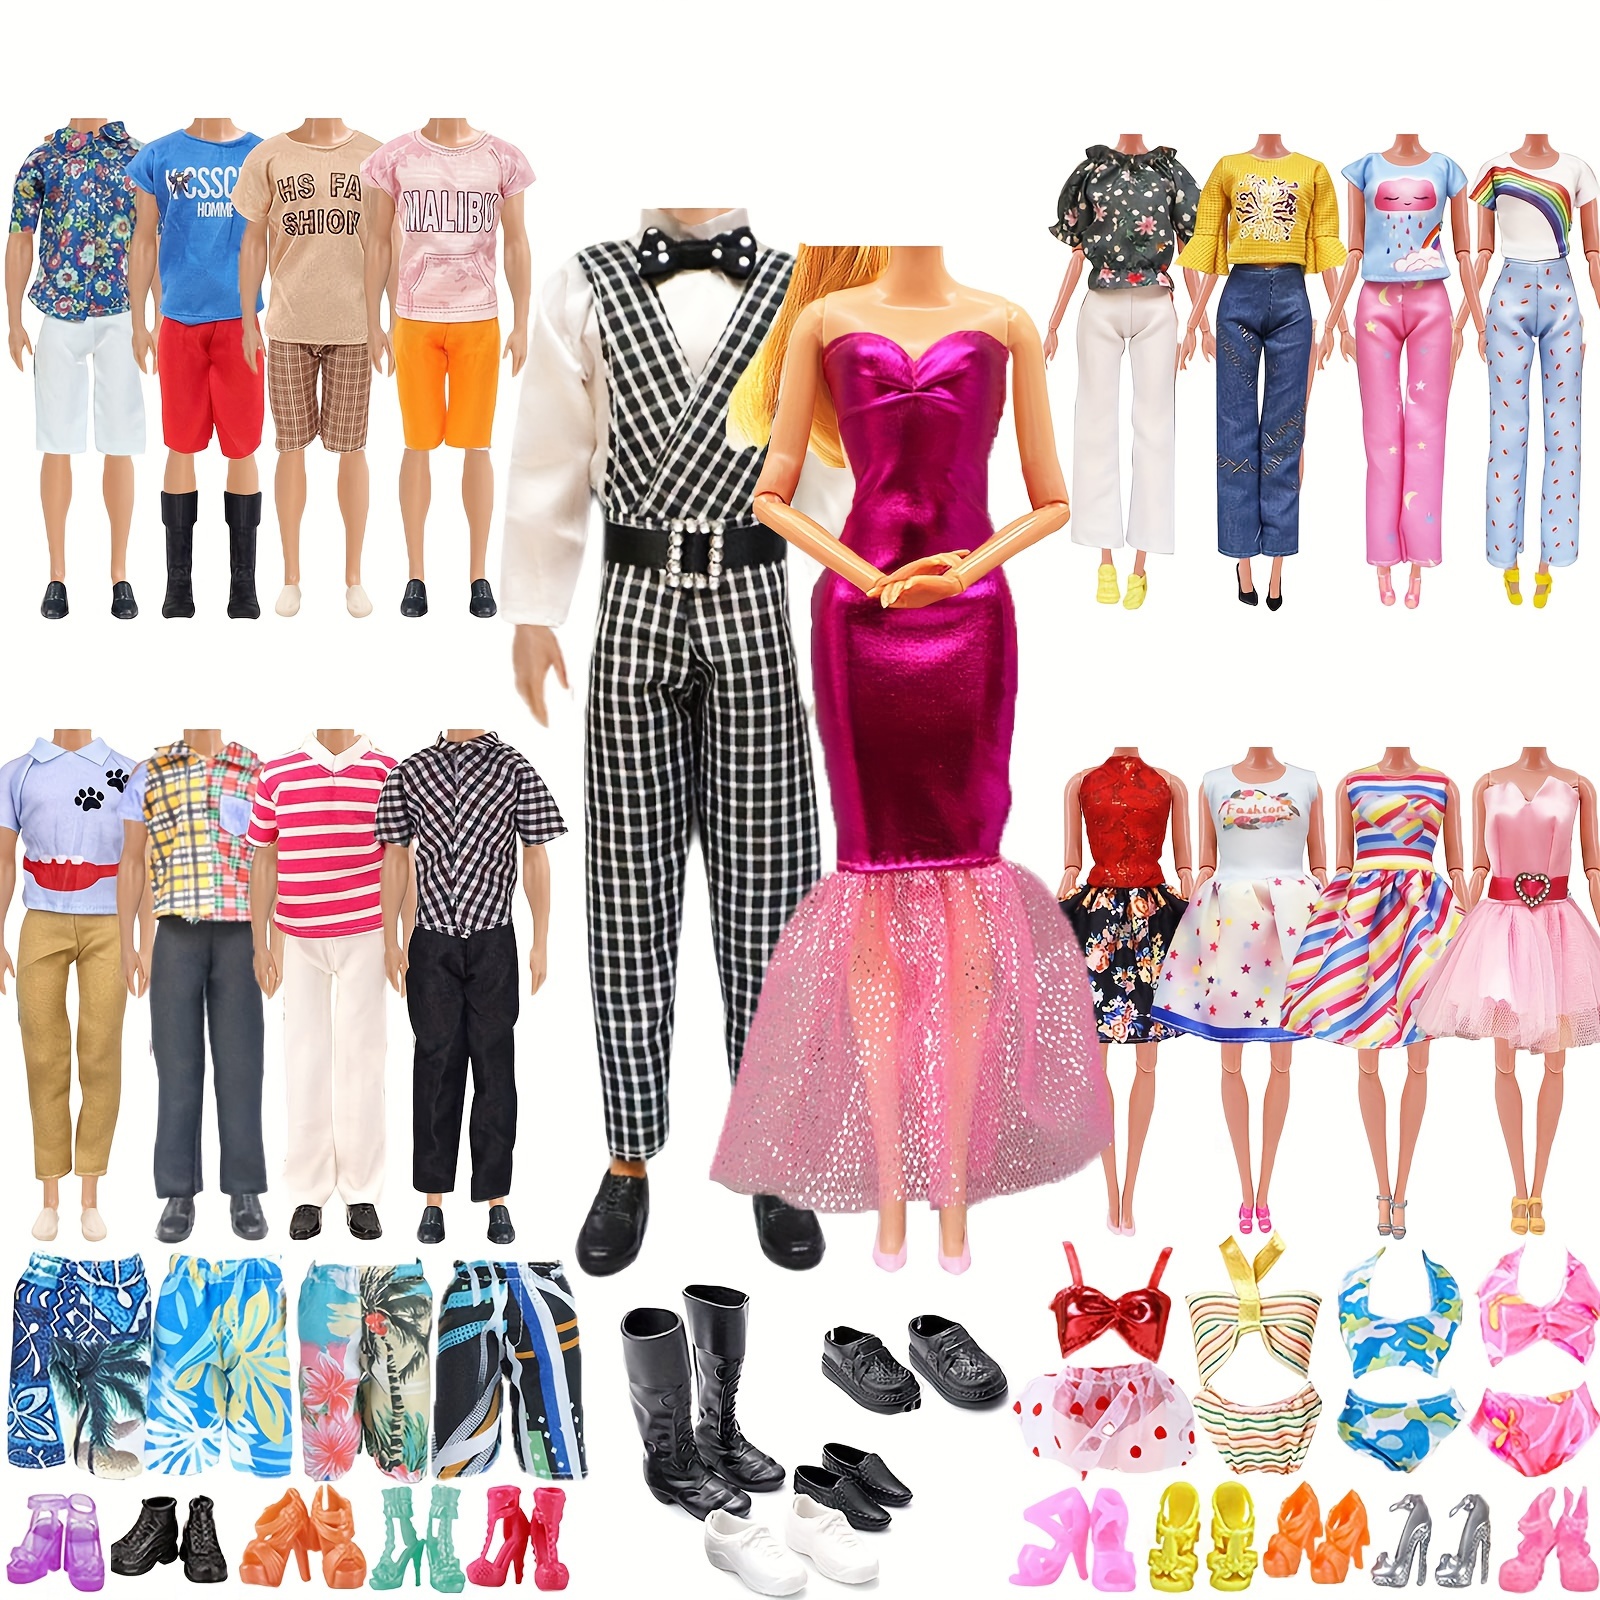 Ken Doll Clothes Shoes Fashion Daily Casual Wear Top+Pants Two-Pieces Suits  For Barbies